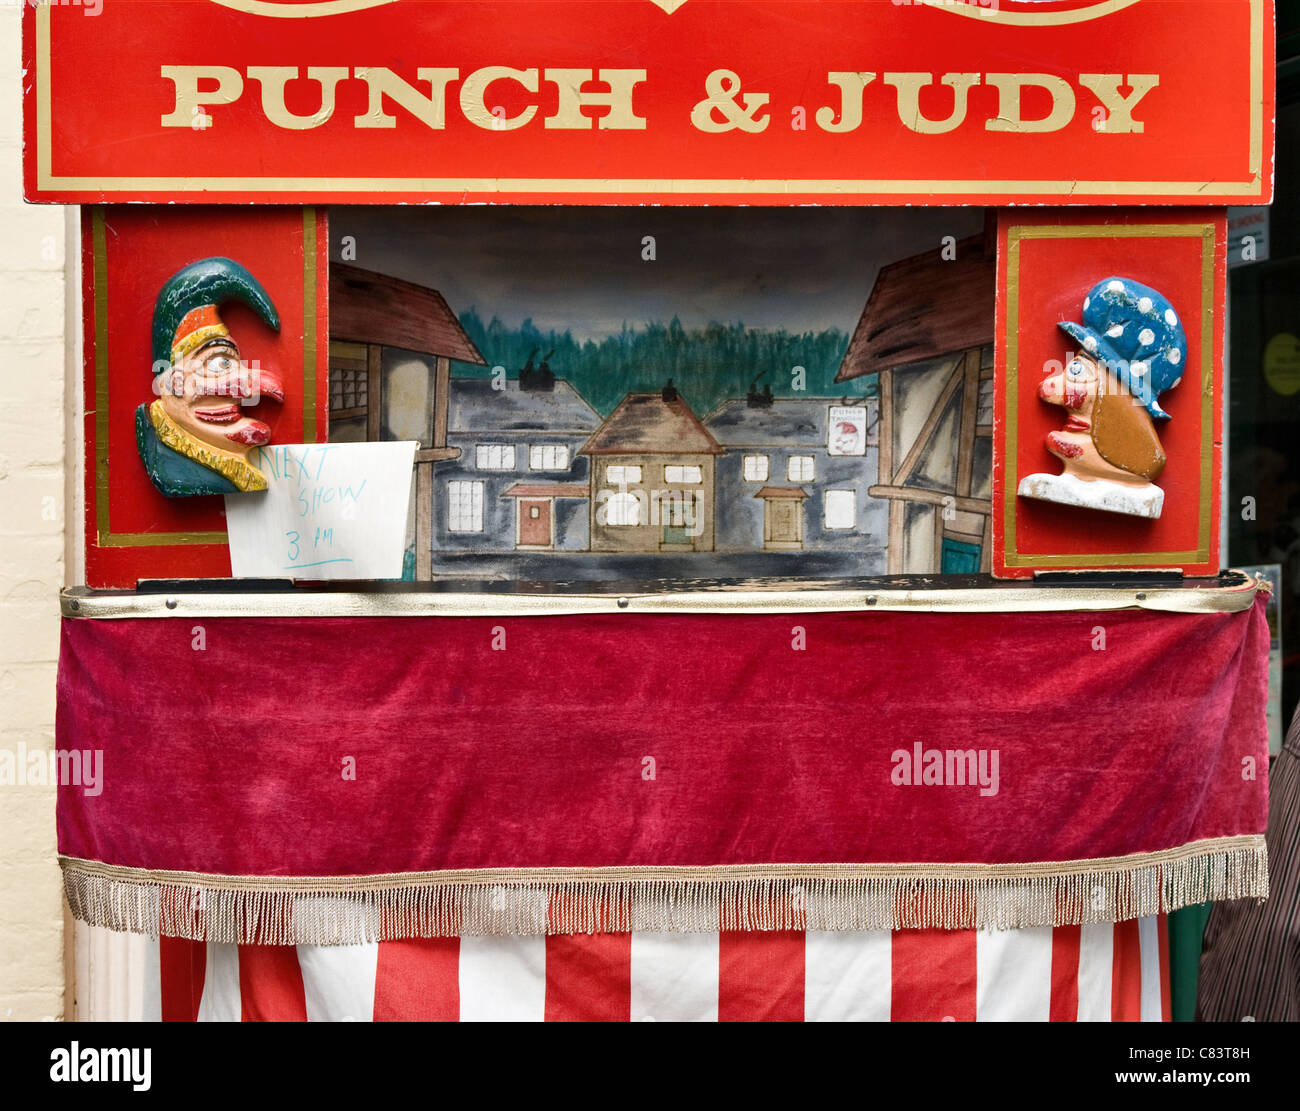 Punch & Judy show, gone to lunch. View from the front. Close up Stock Photo